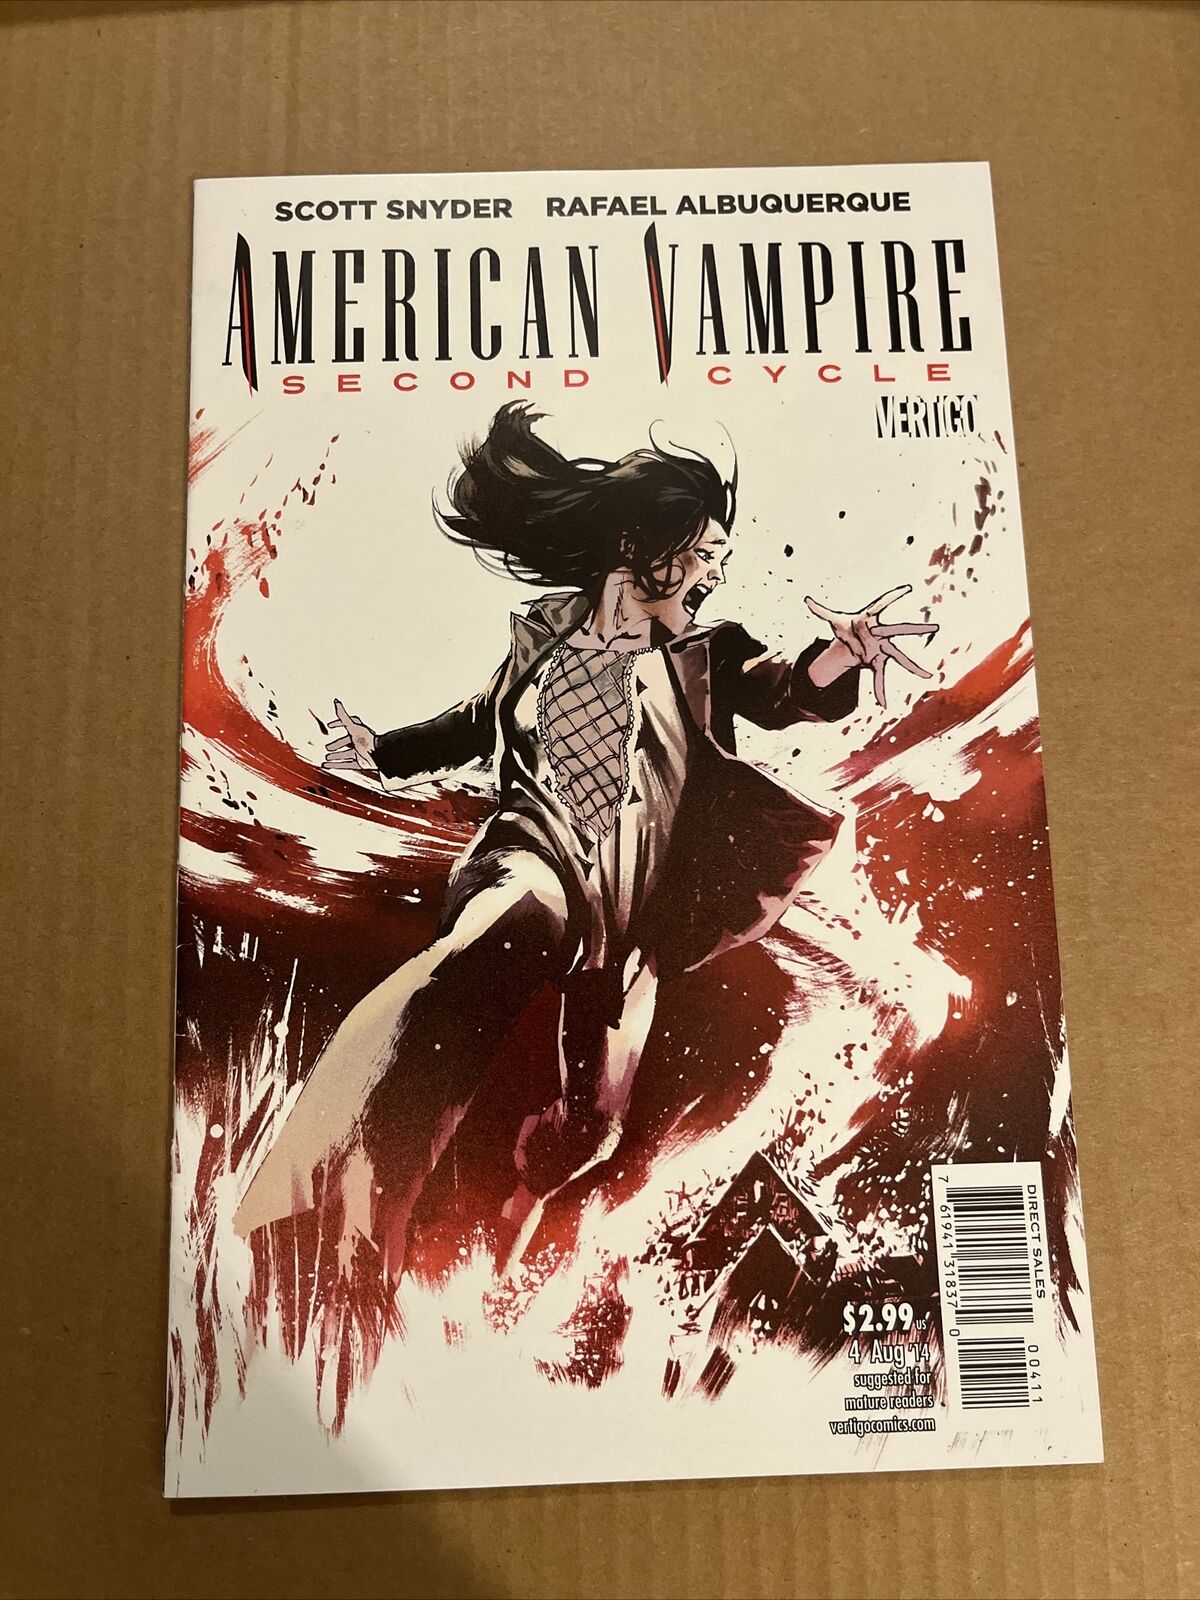 American Vampire: Second Cycle #4 (Sept. '14; DC) - Scott Snyder; great series!